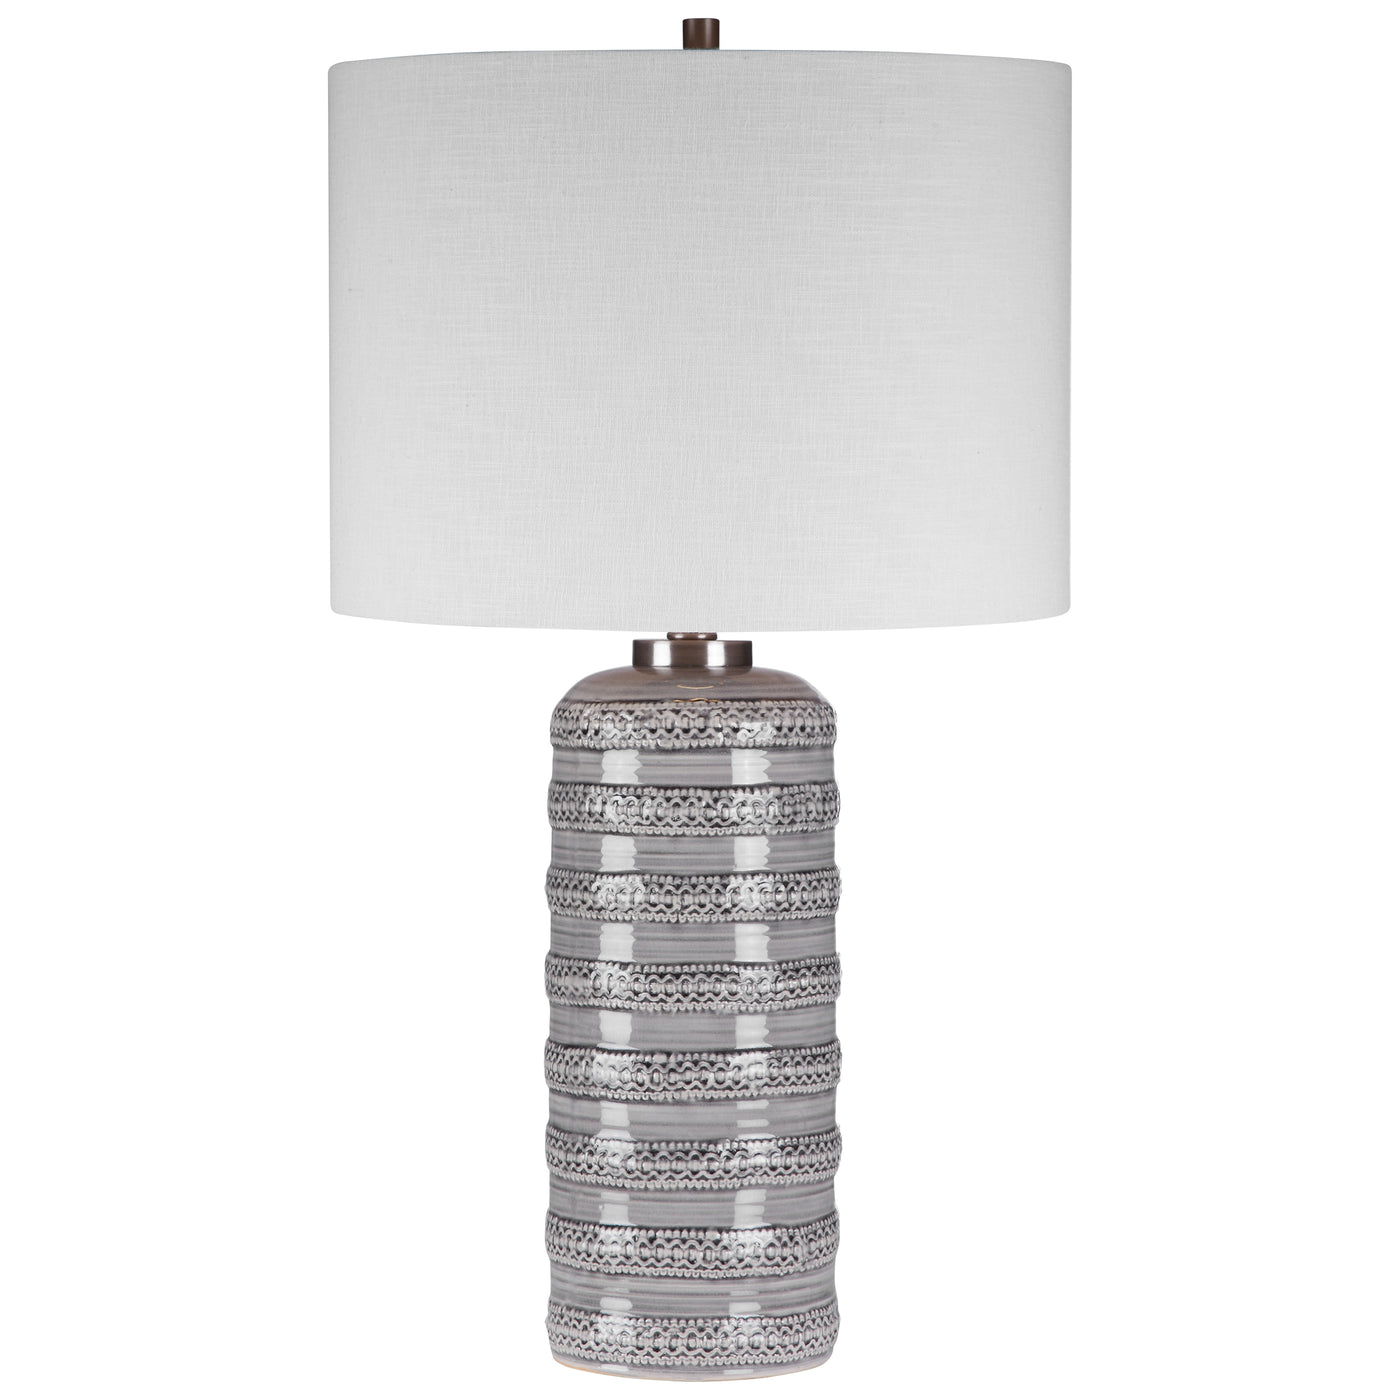 This Traditional Ceramic Table Lamp Has An Elegant, Overlaid Lace Design With A Delicate Light Gray Glaze, Accented With B...